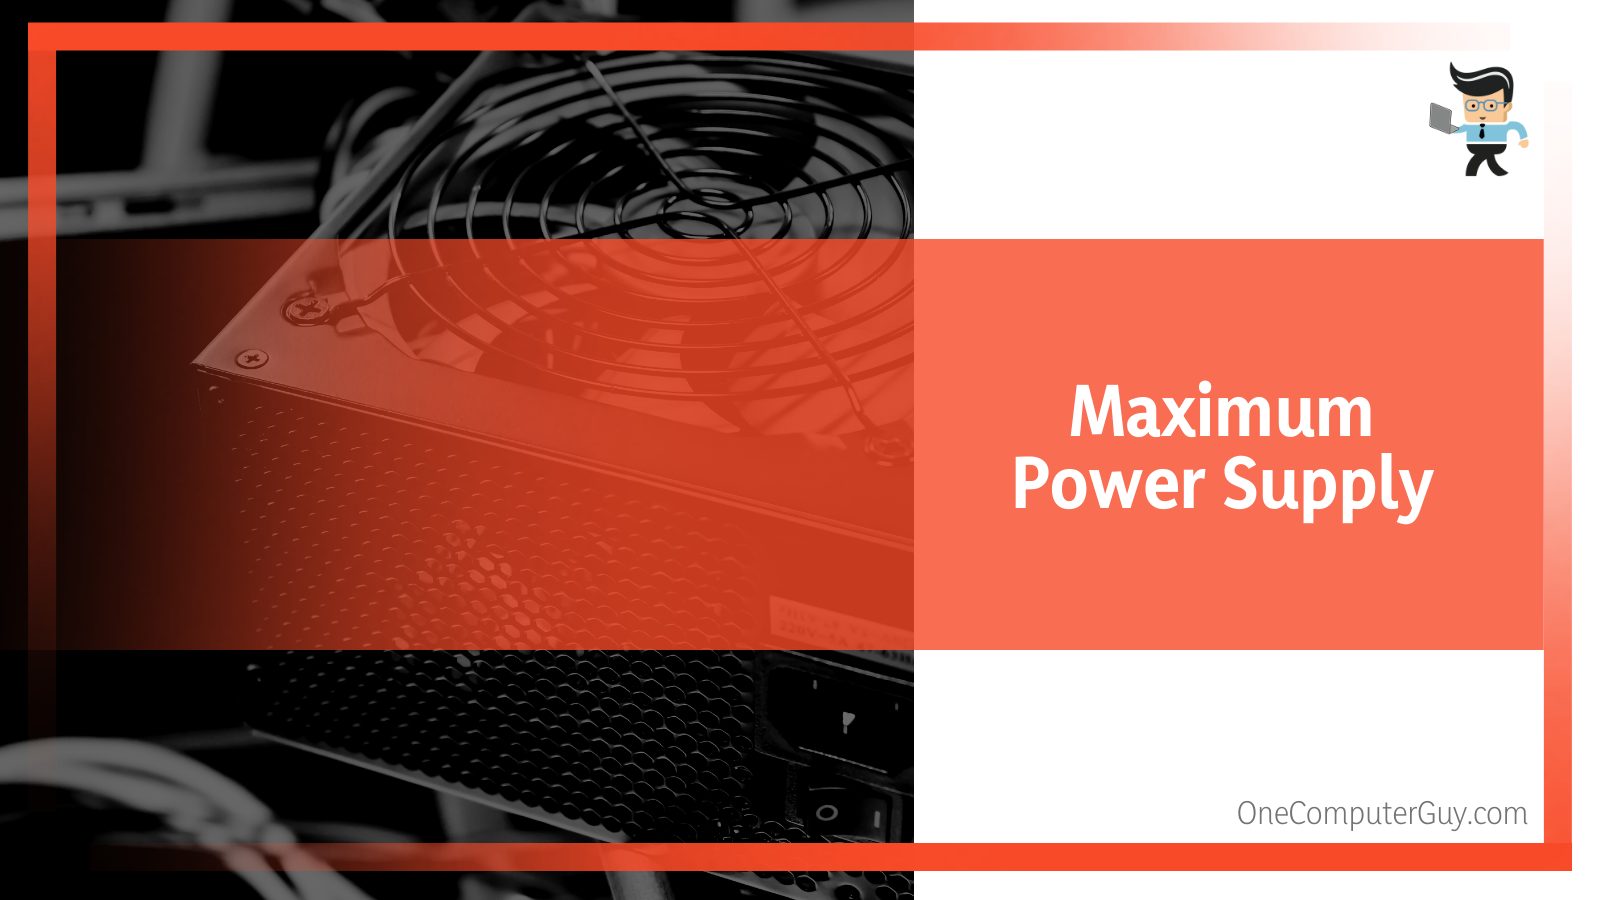 Important information on the maximum power supply label x